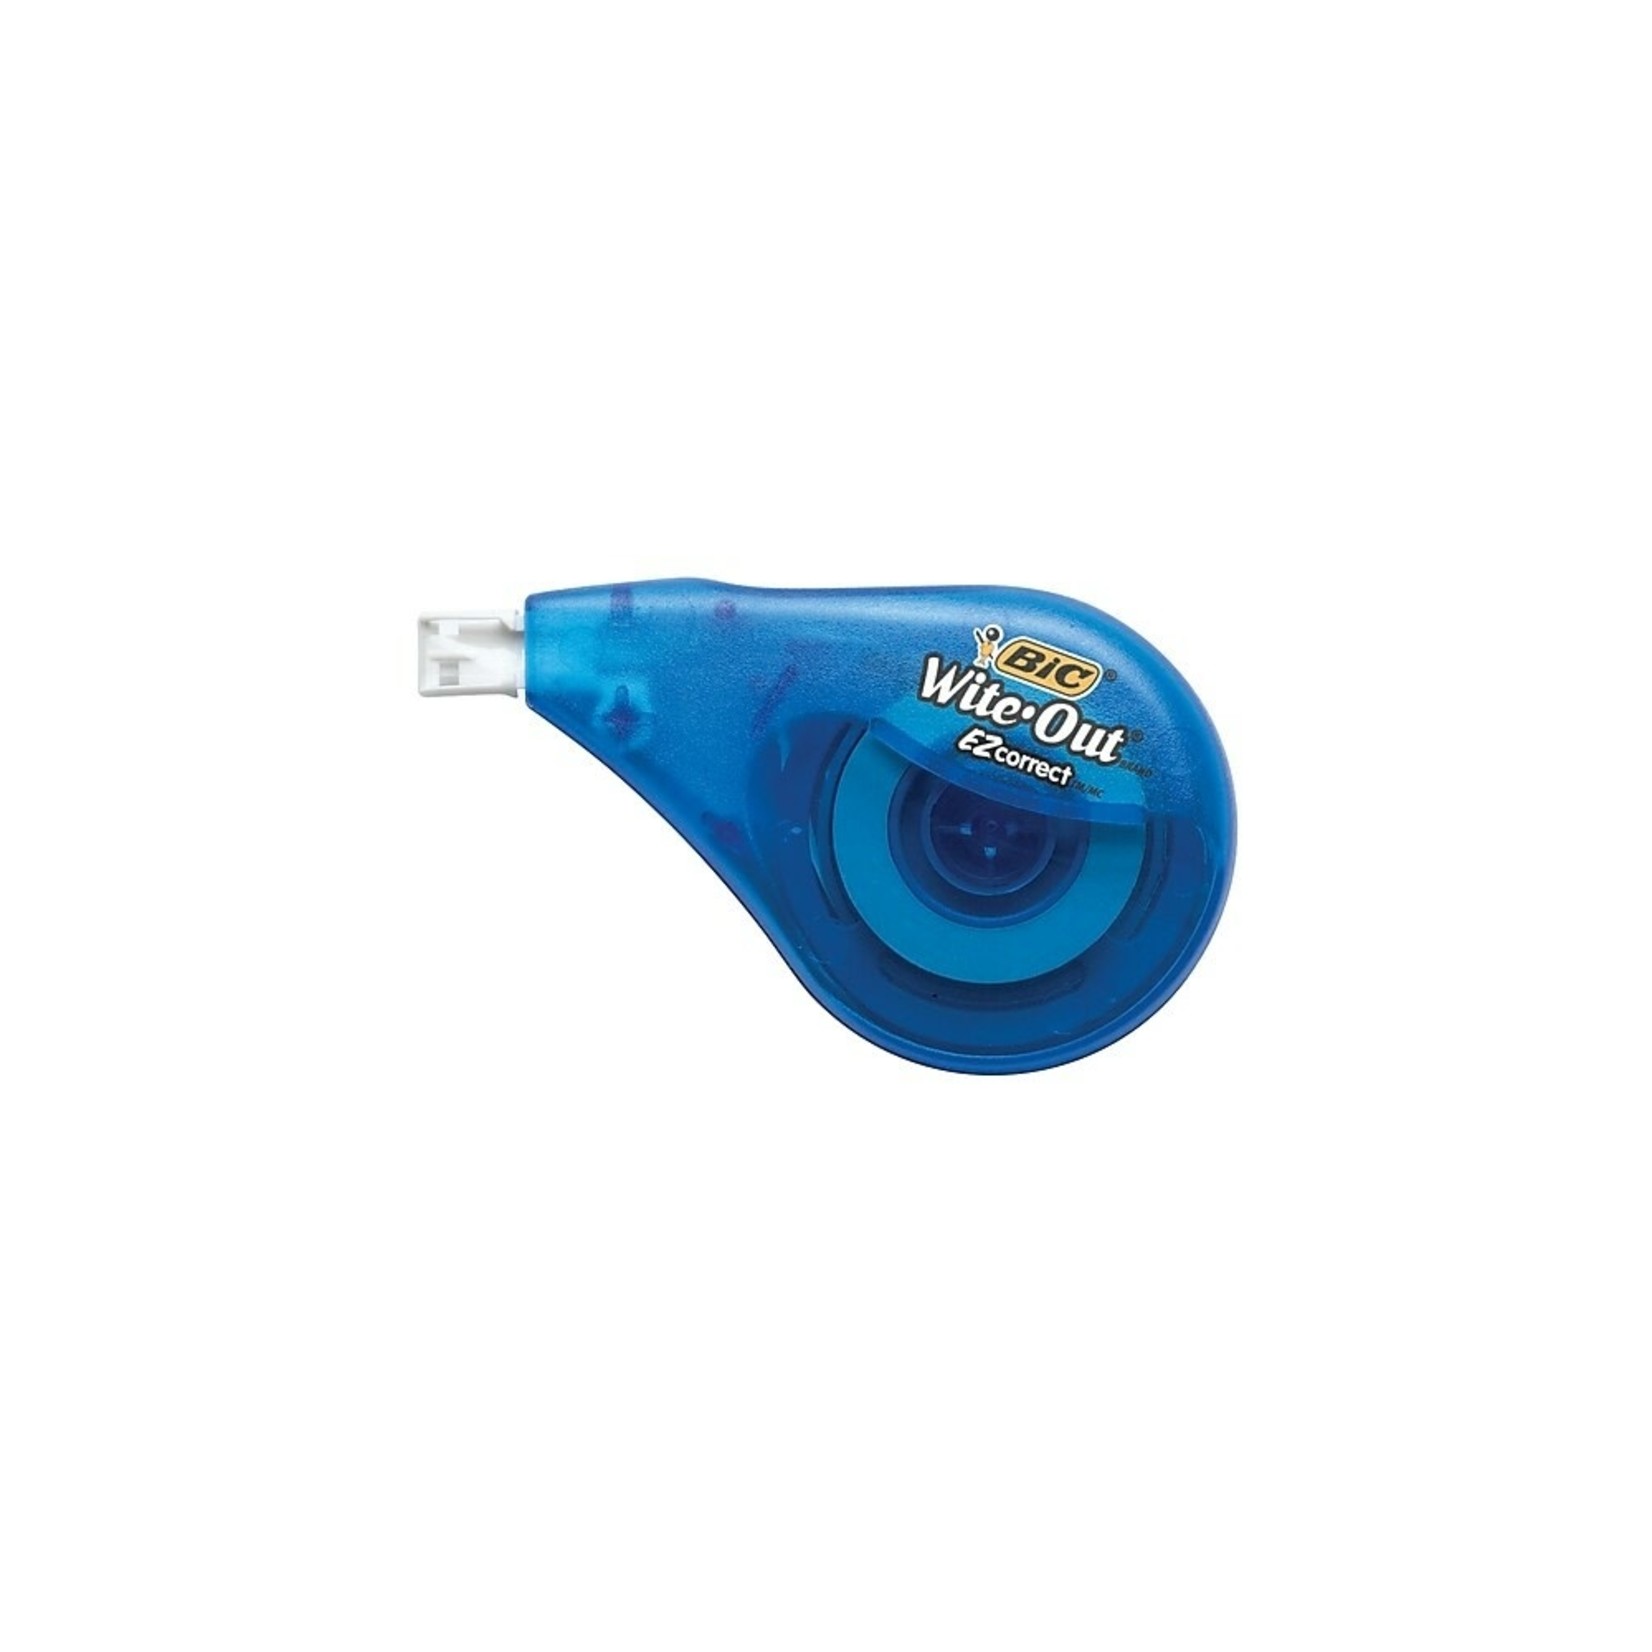 Bic Wite-Out Correction Tape